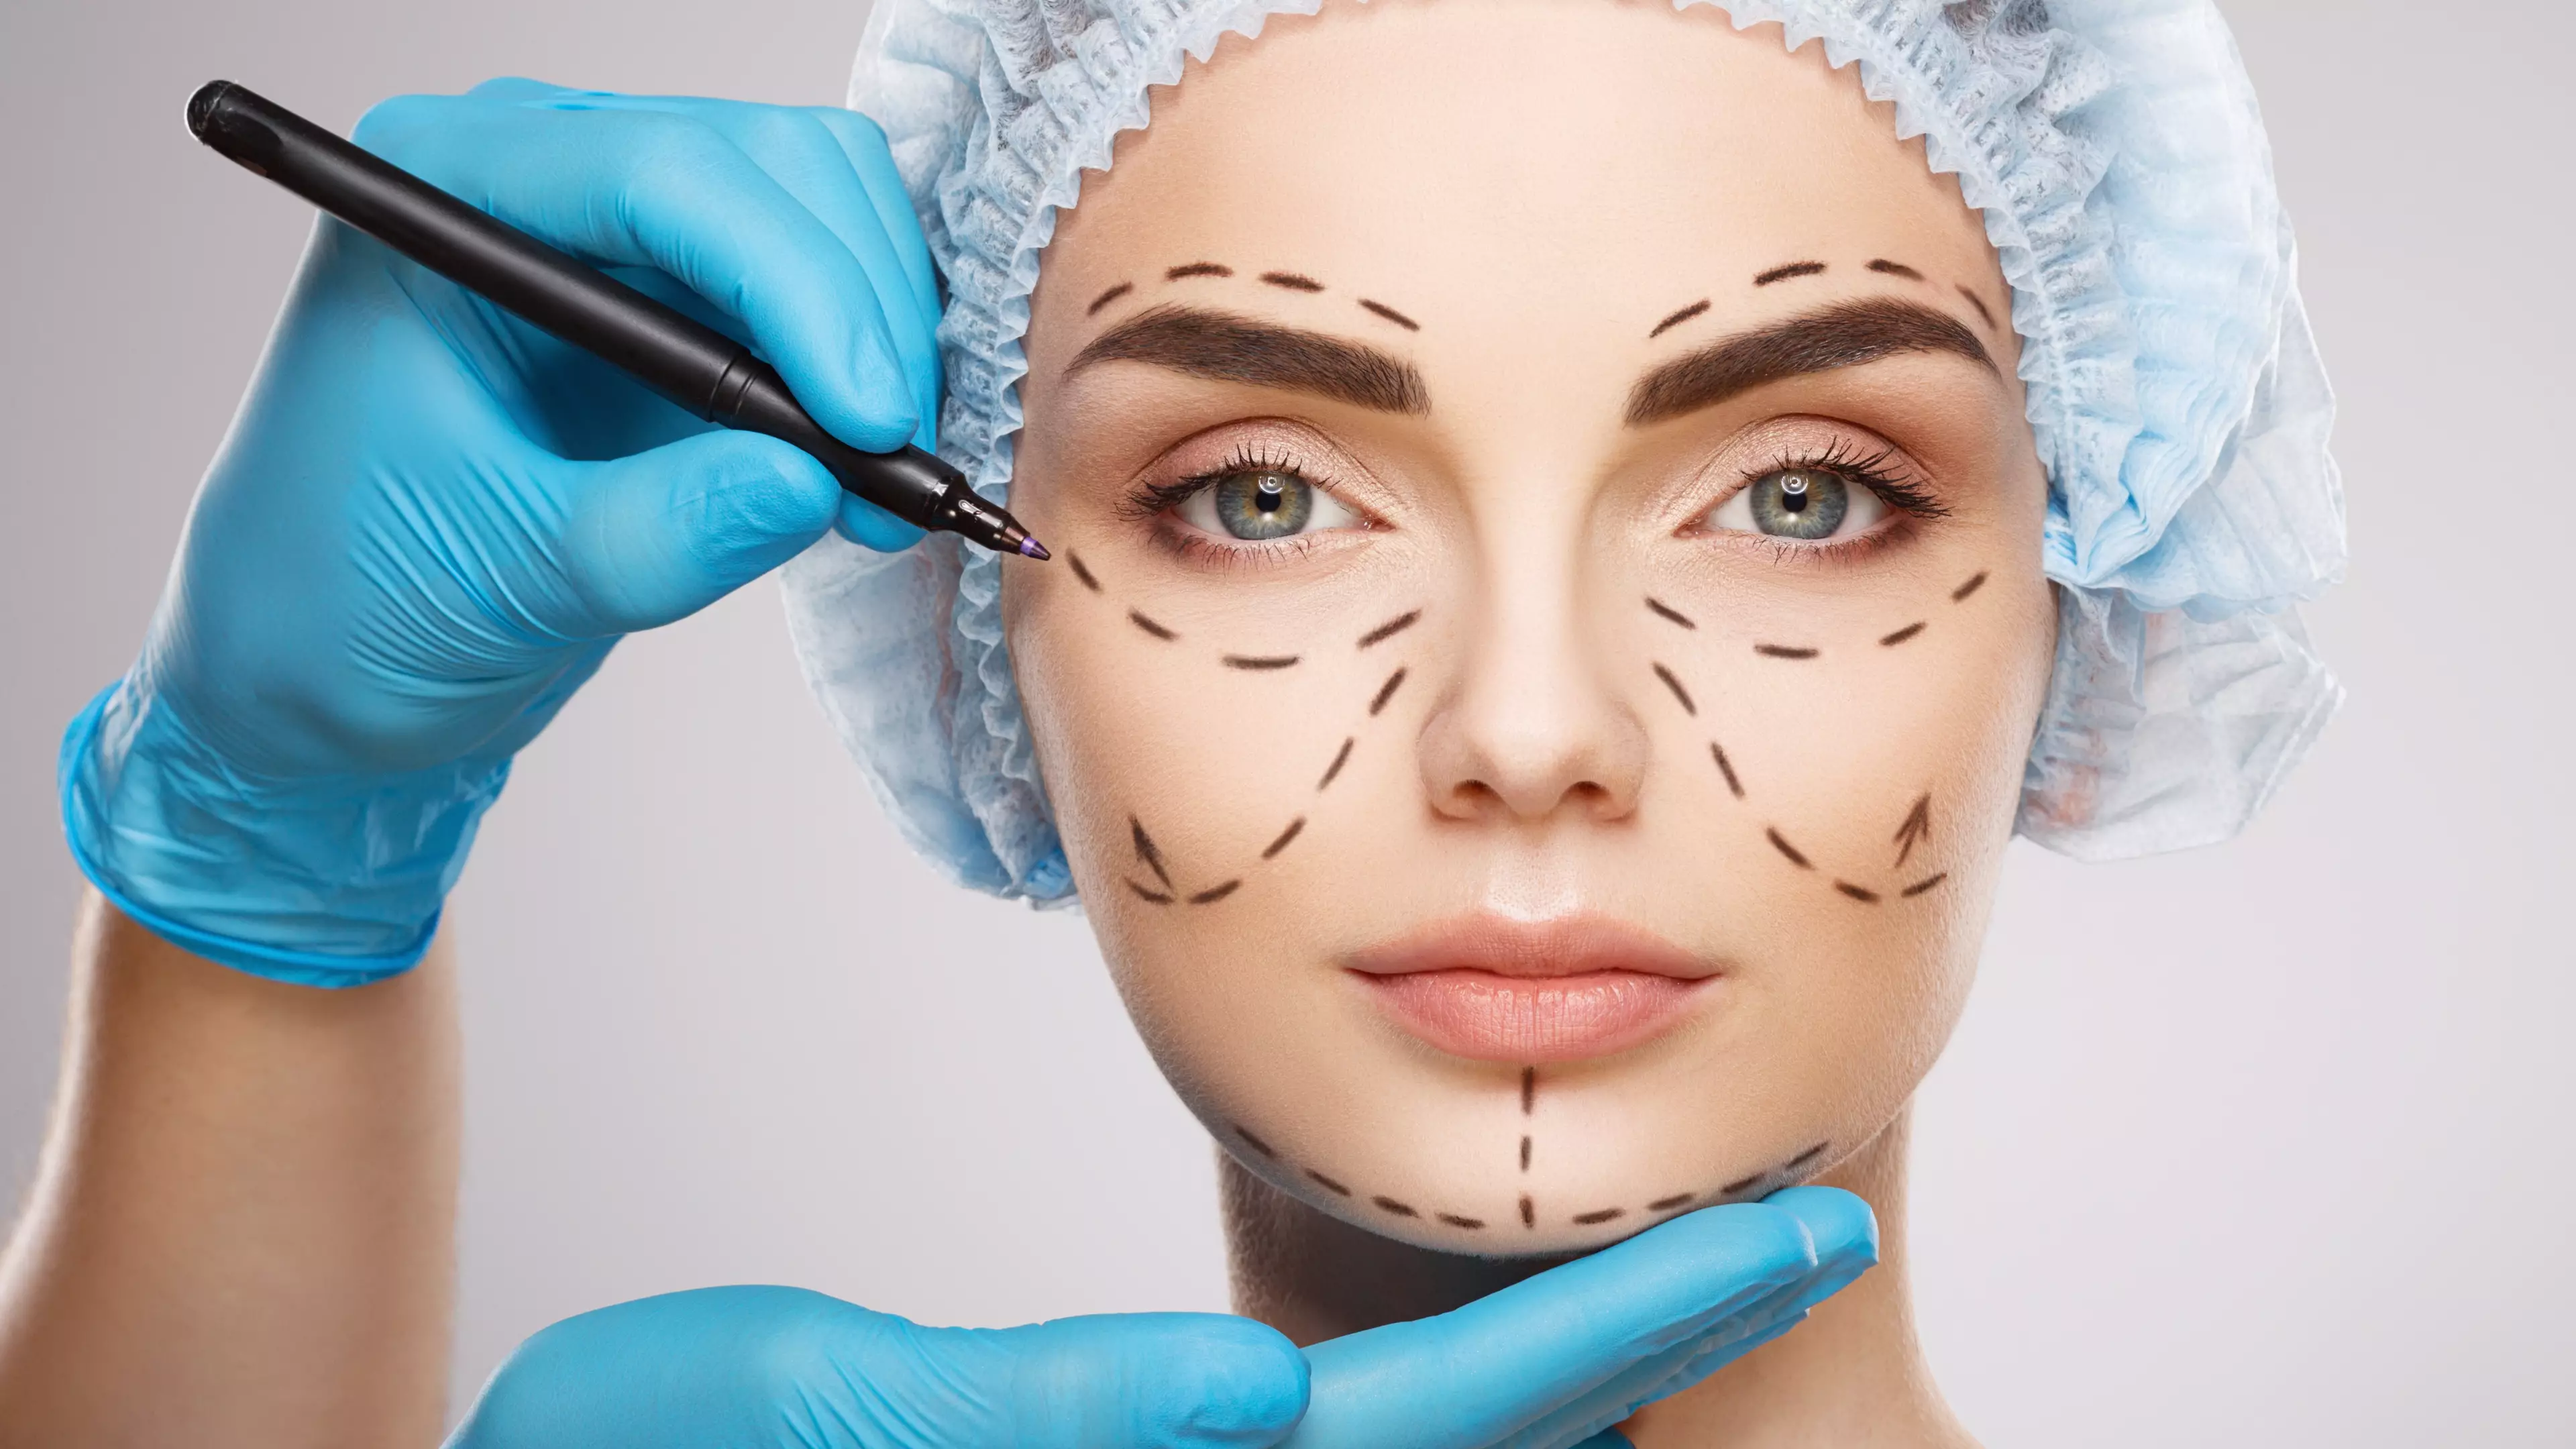 Channel 4's New Show Wants People To Compete To Win Plastic Surgery 